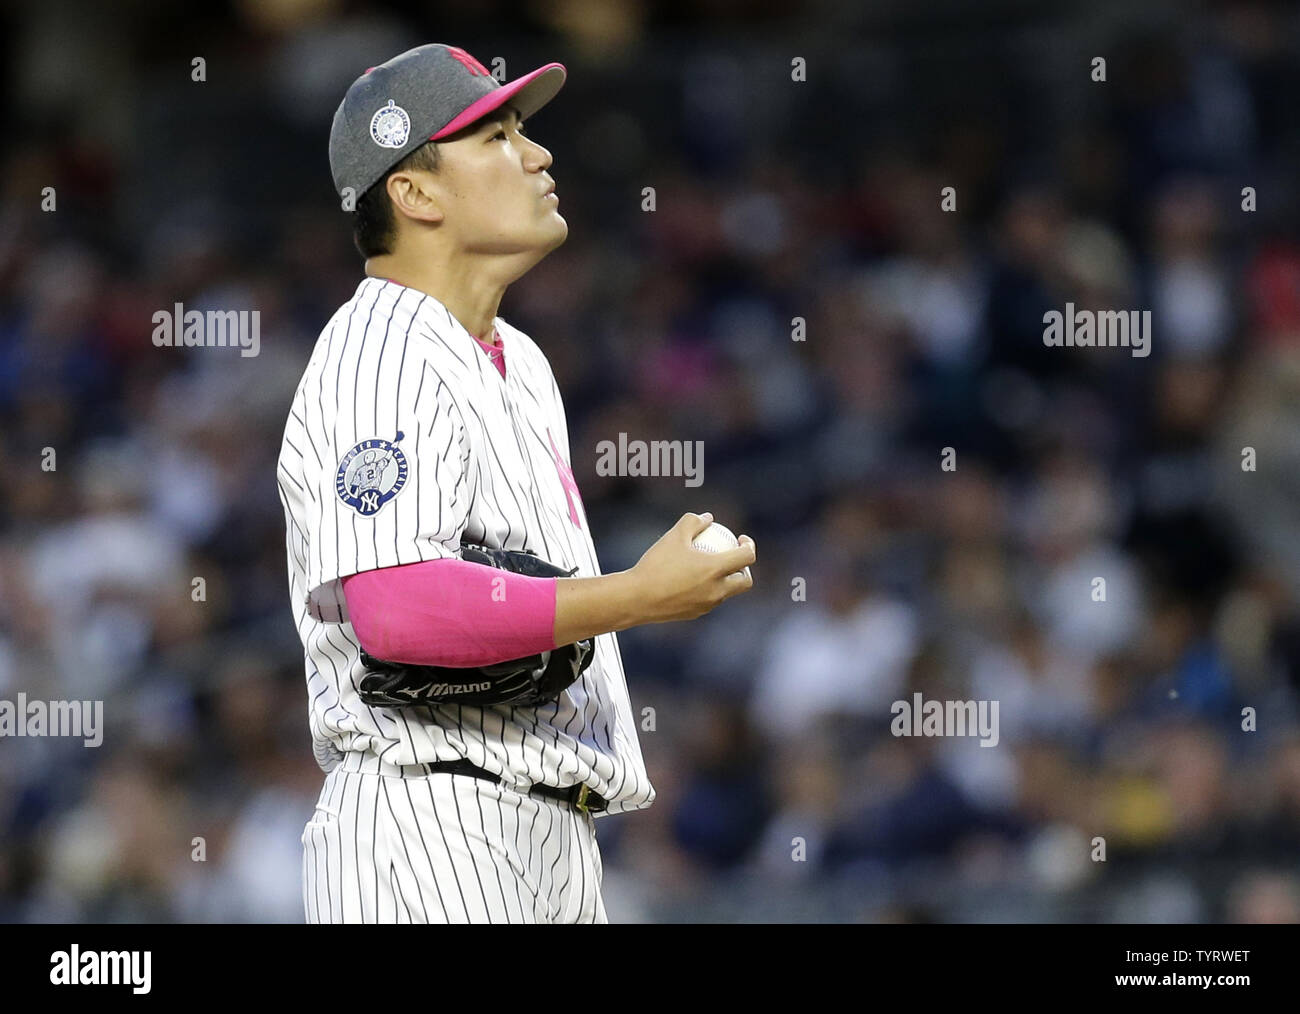 New York Yankees starting pitcher Masahiro Tanaka reacts after giving up a grand slam to Houston Astros Alex Bregman in the first inning at Yankee Stadium in New York City on May 14, 2017. The New York Yankees former shortstop Derek Jeter before the game had his No. 2 retired and was also honored with a plaque in Monument Park.     Photo by John Angelillo/UPI Stock Photo